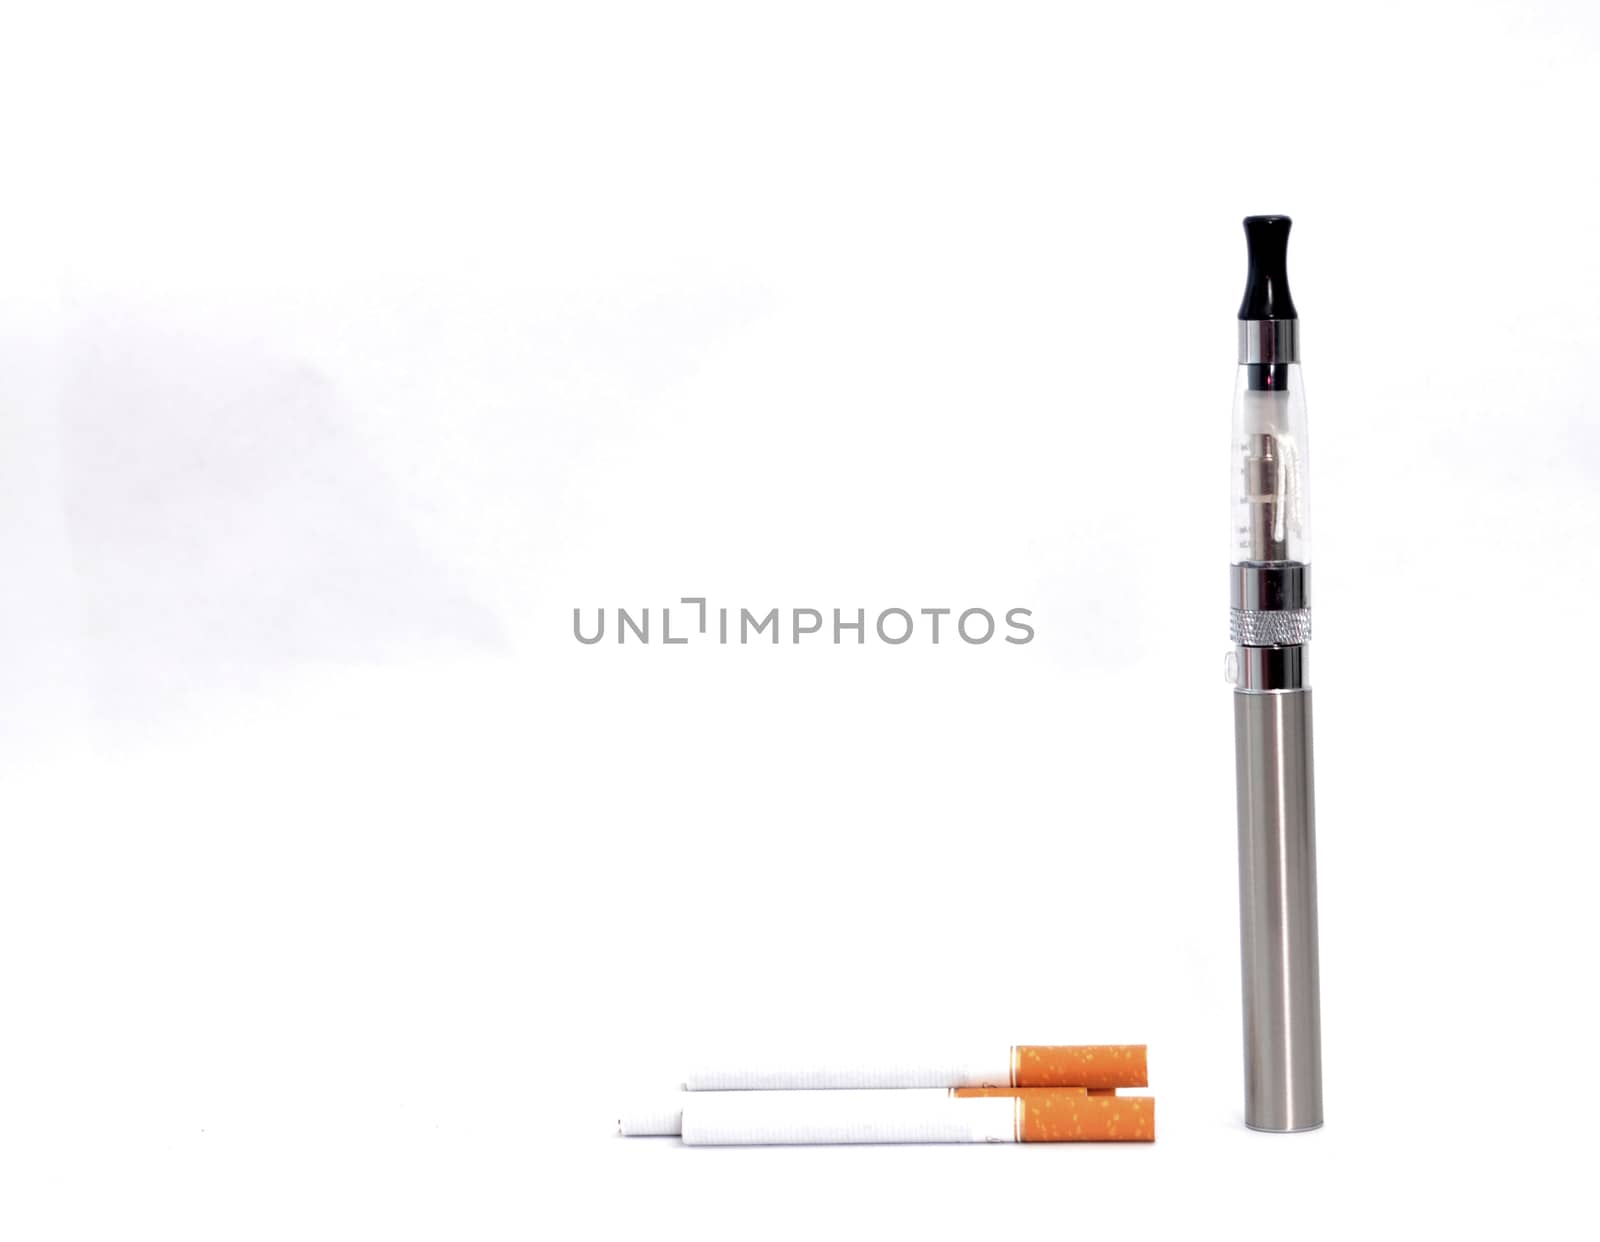 image of a big electronic cigarette on white background